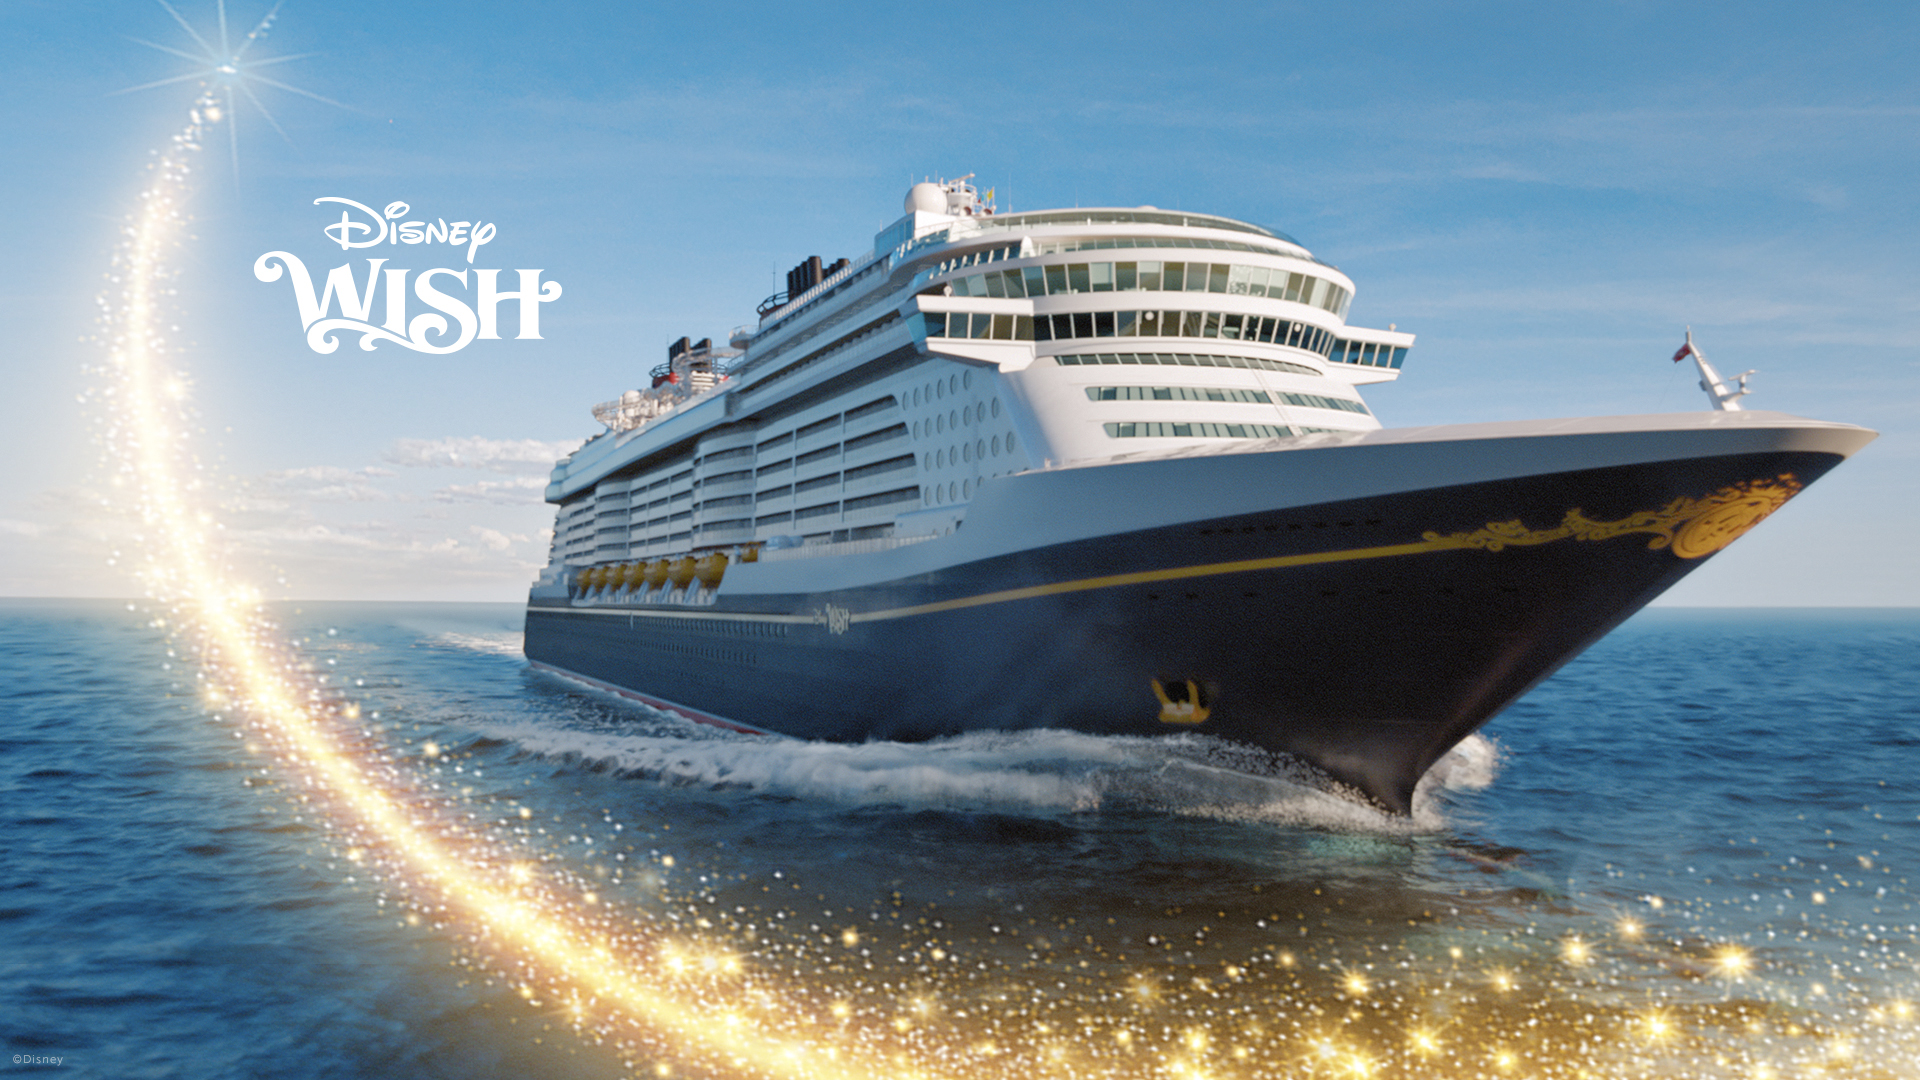 Disney Wish: All You Need To Know About This Stunning Disney Cruise Ship!